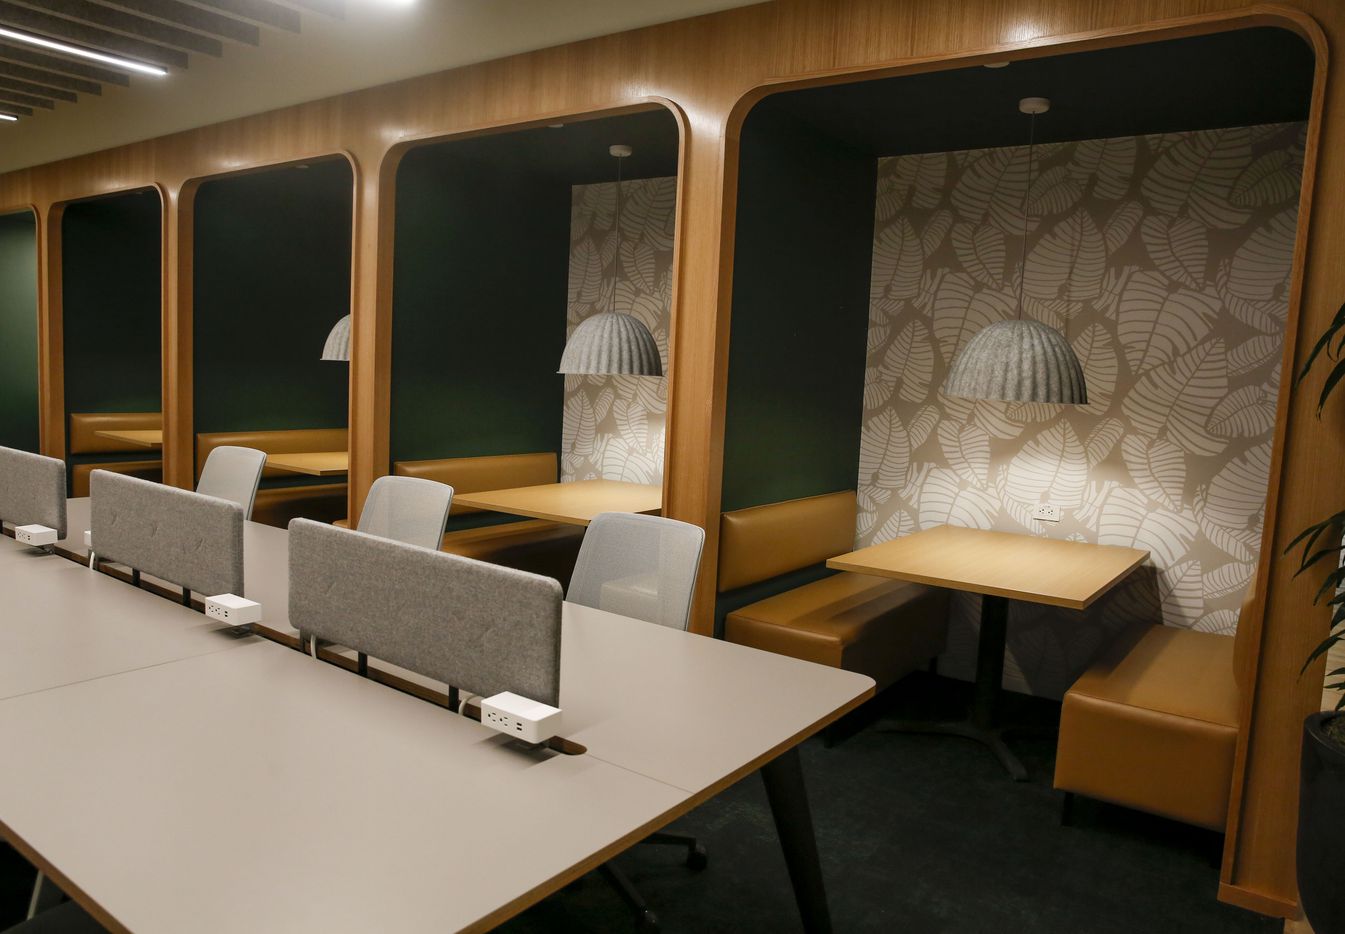 There are many different styles of co-working spaces at Hana.